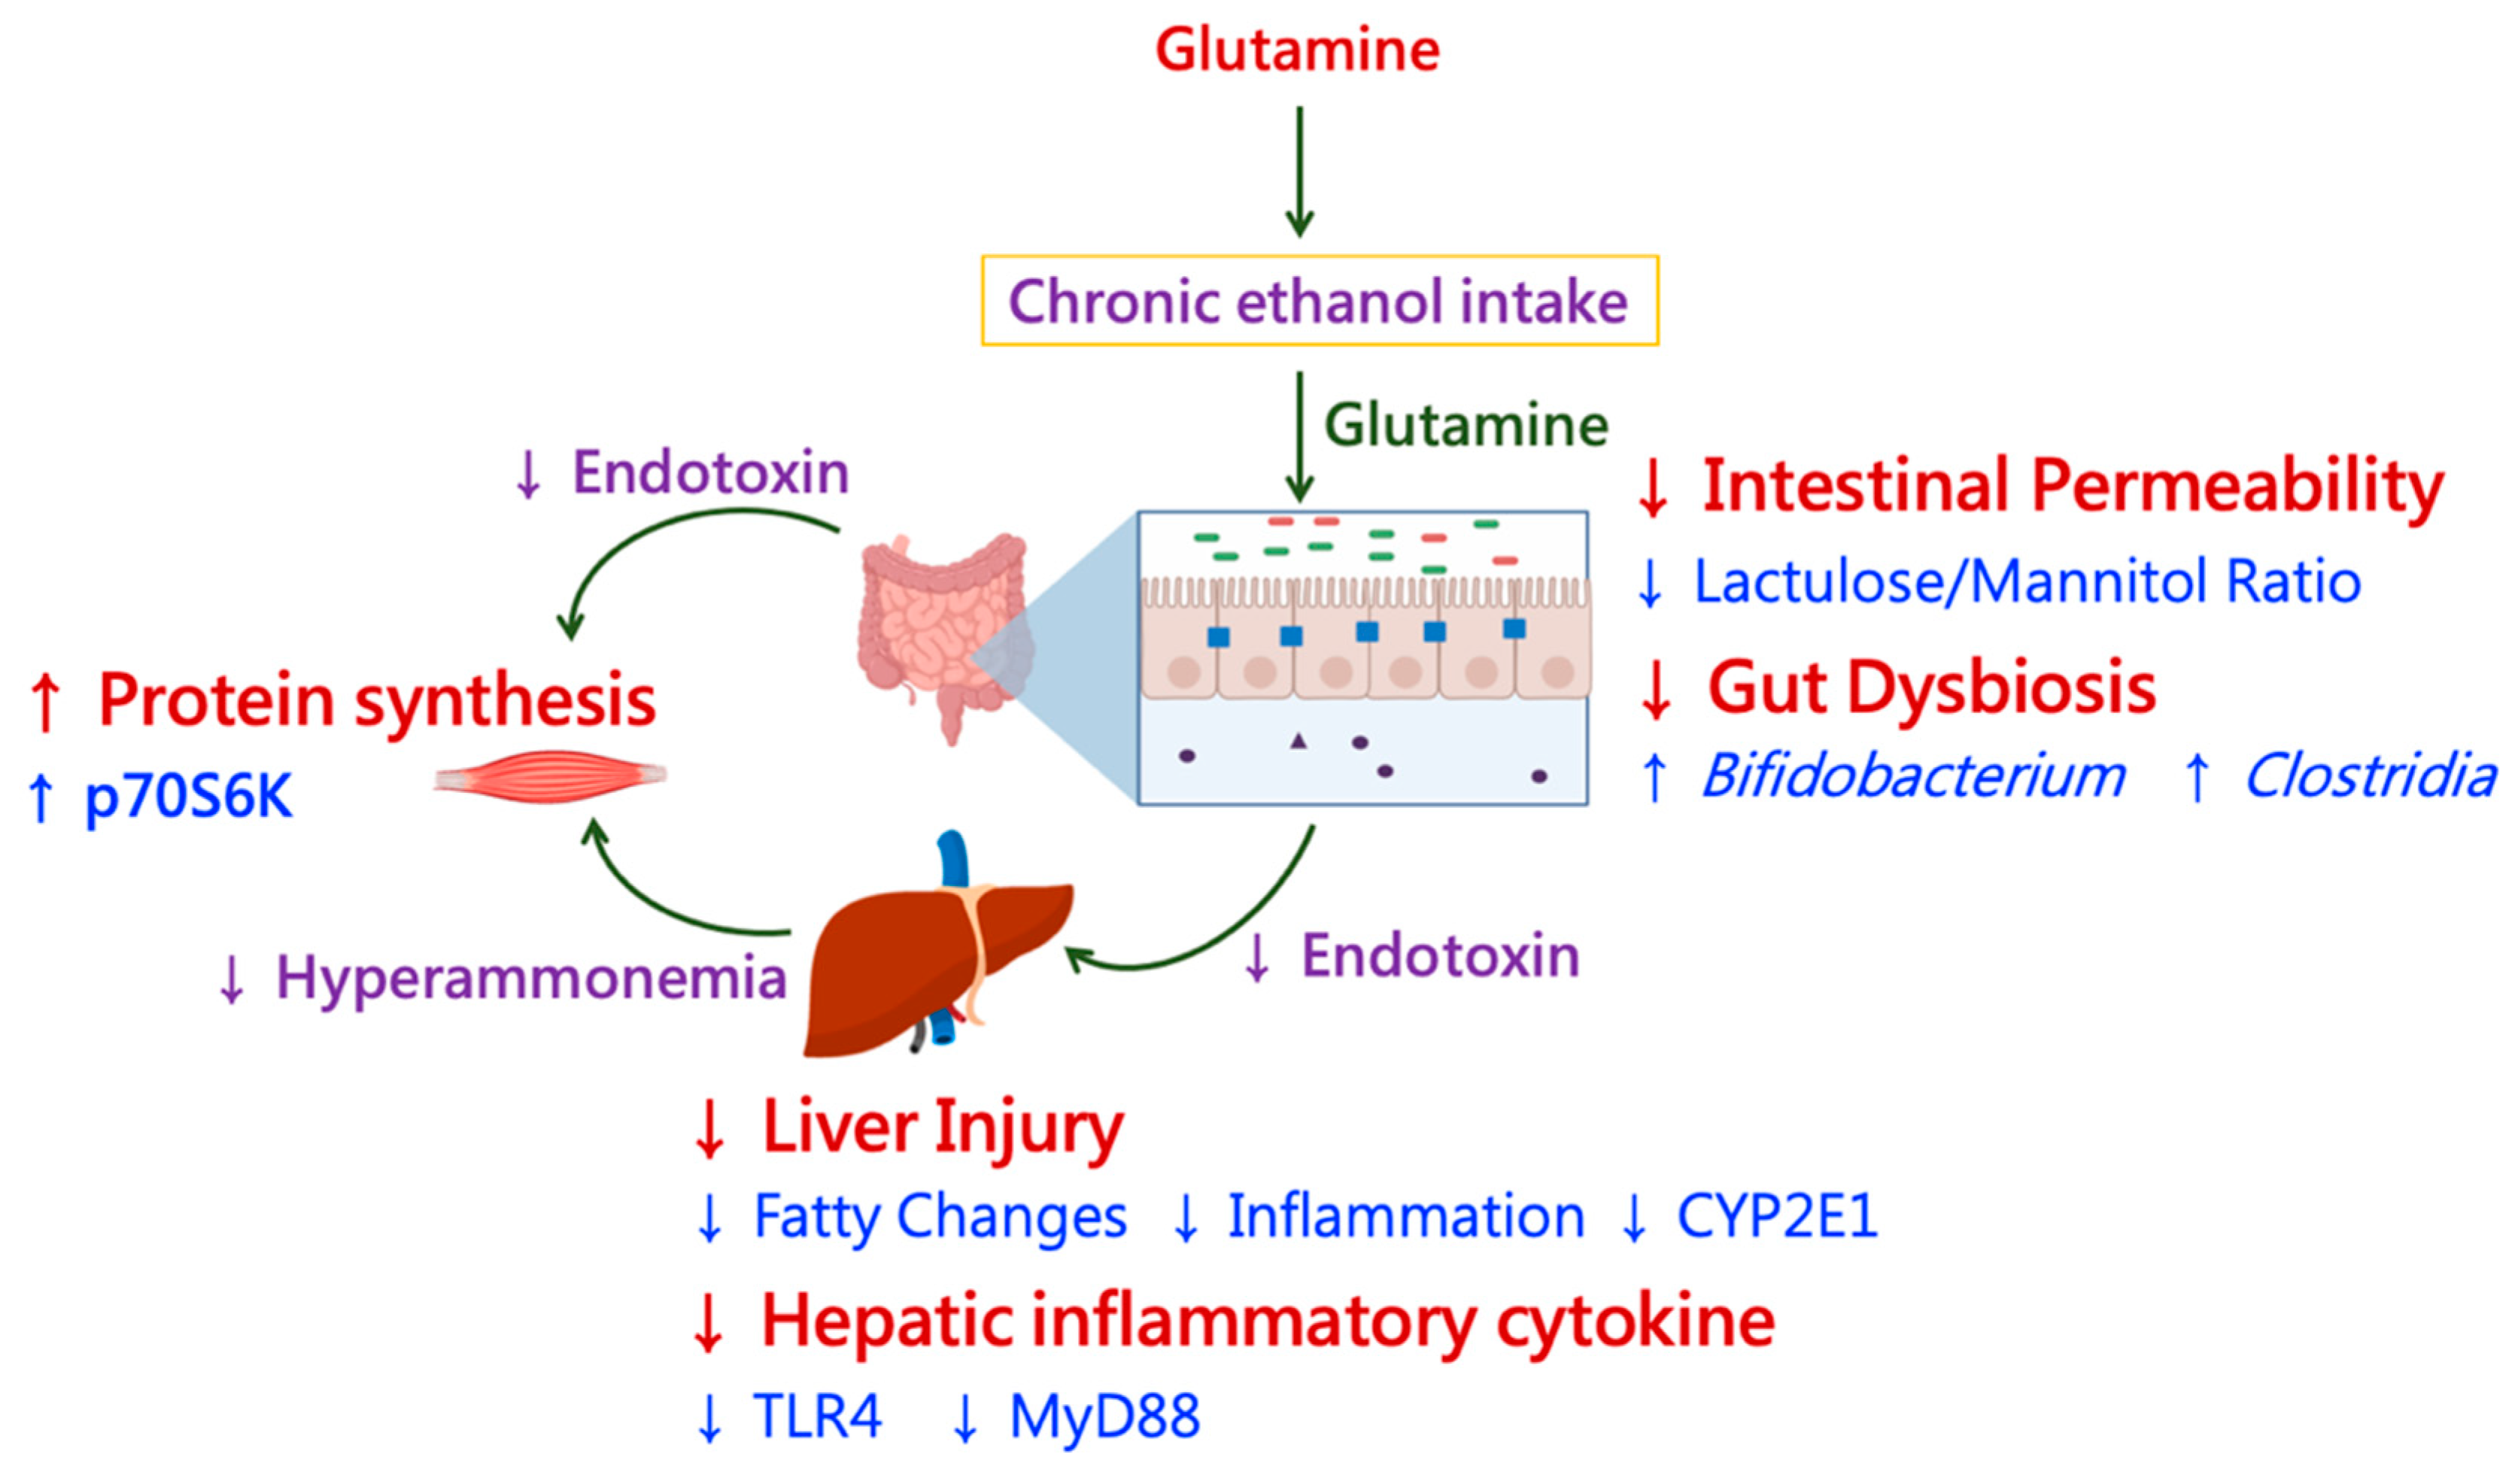 Glutamine and protein synthesis